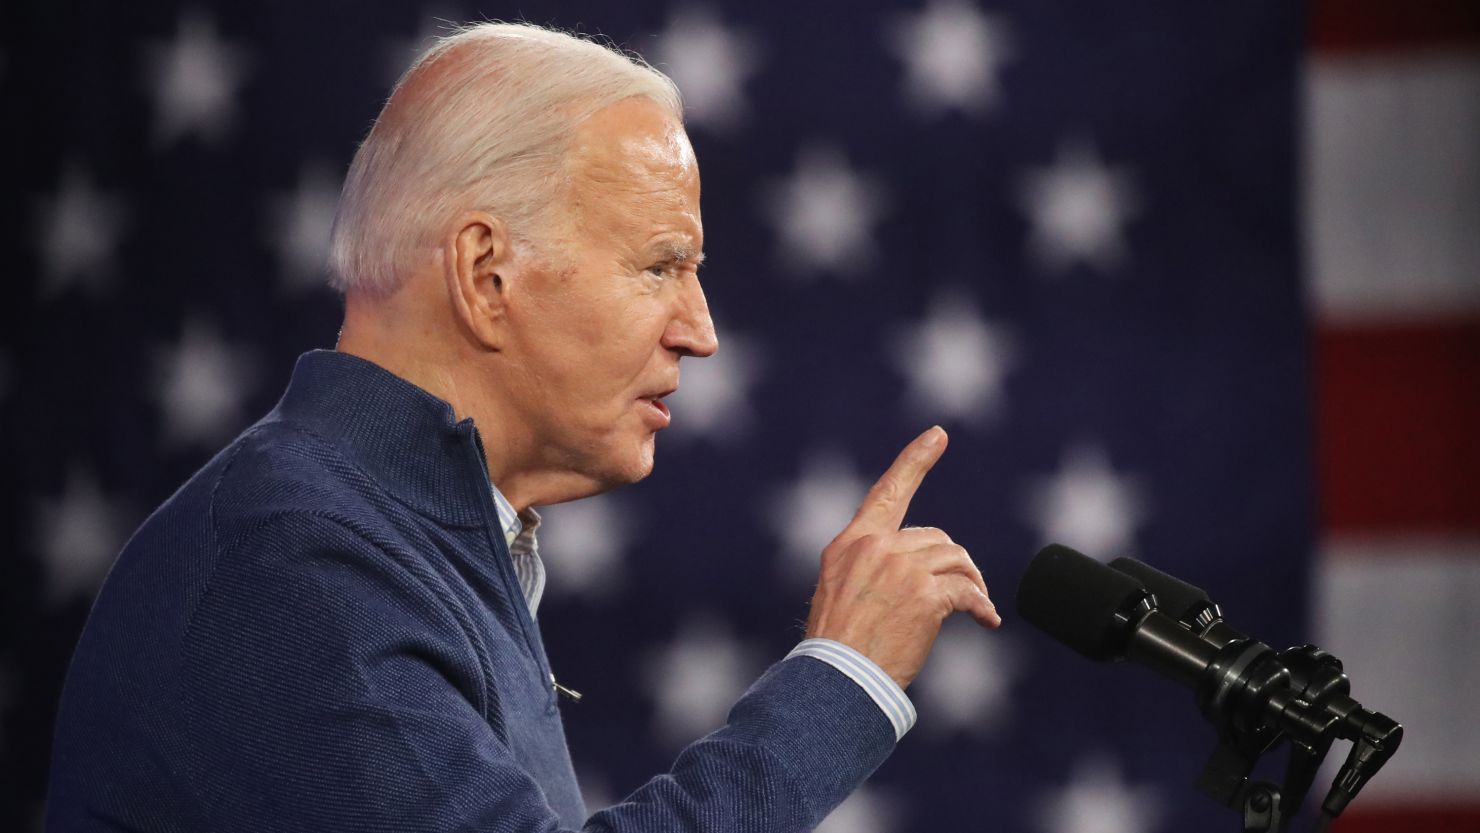 President Joe Biden speaks during a campaign event on March 08, 2024 in Wallingford, Pennsylvania.